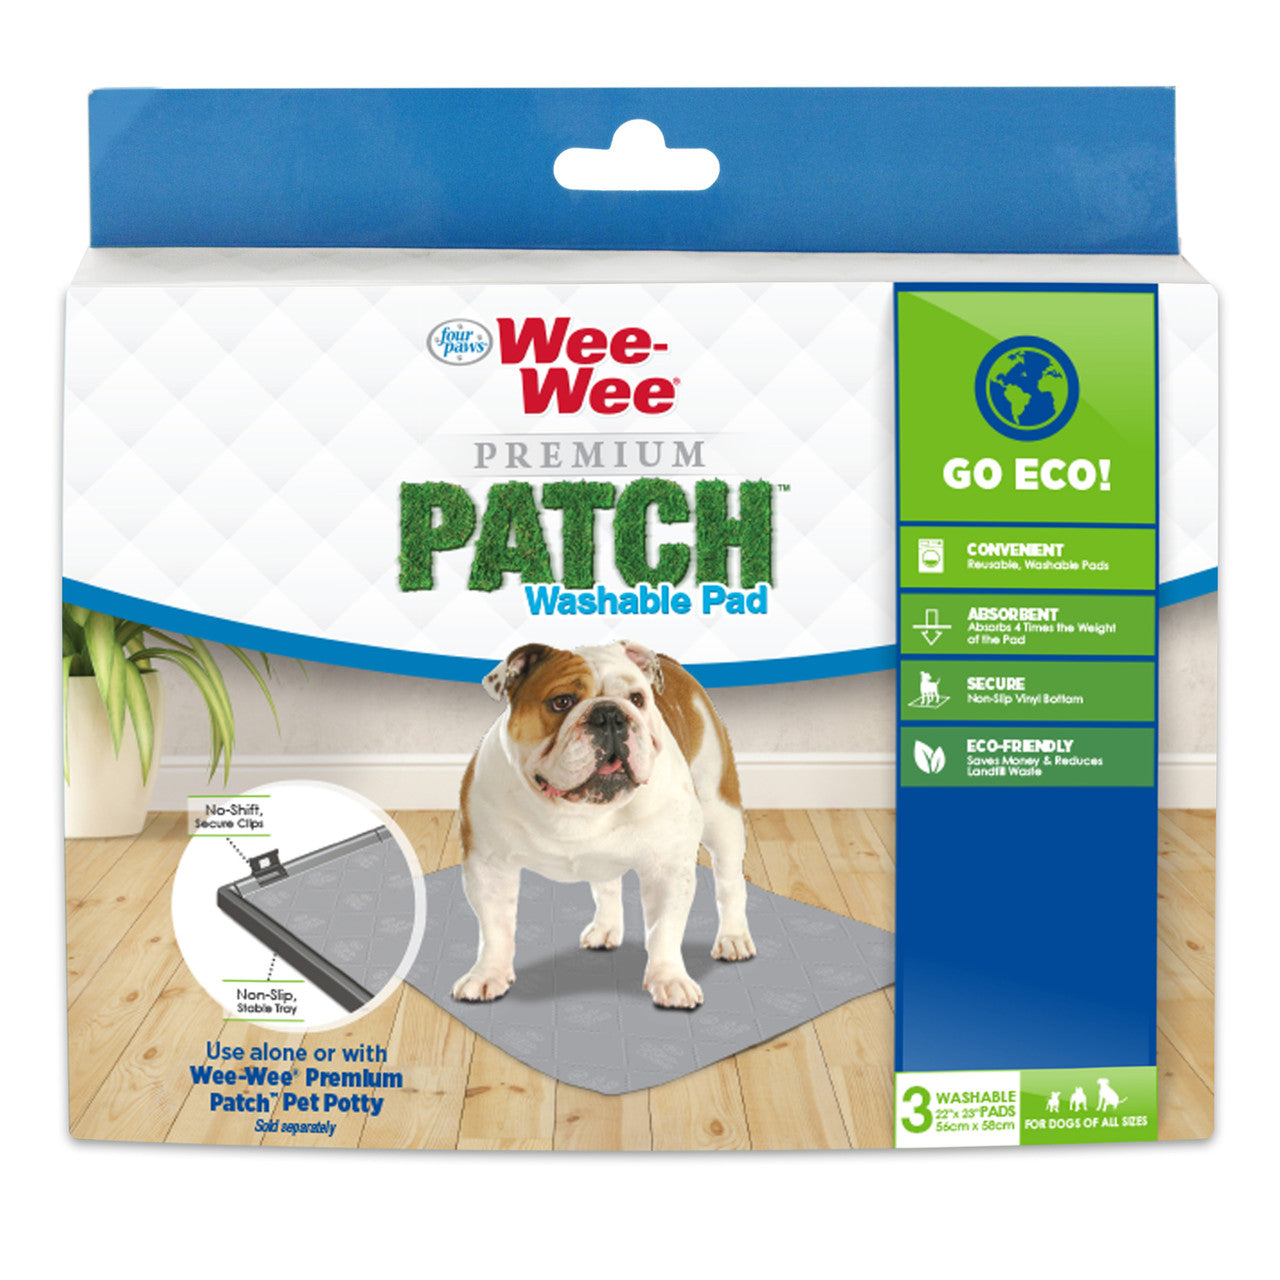 Four Paws Wee-Wee Premium Patch Reusable Pee Pad for Dogs, Premium Patch (Washable Pad) 24.5" x 25.7" (1 Count)